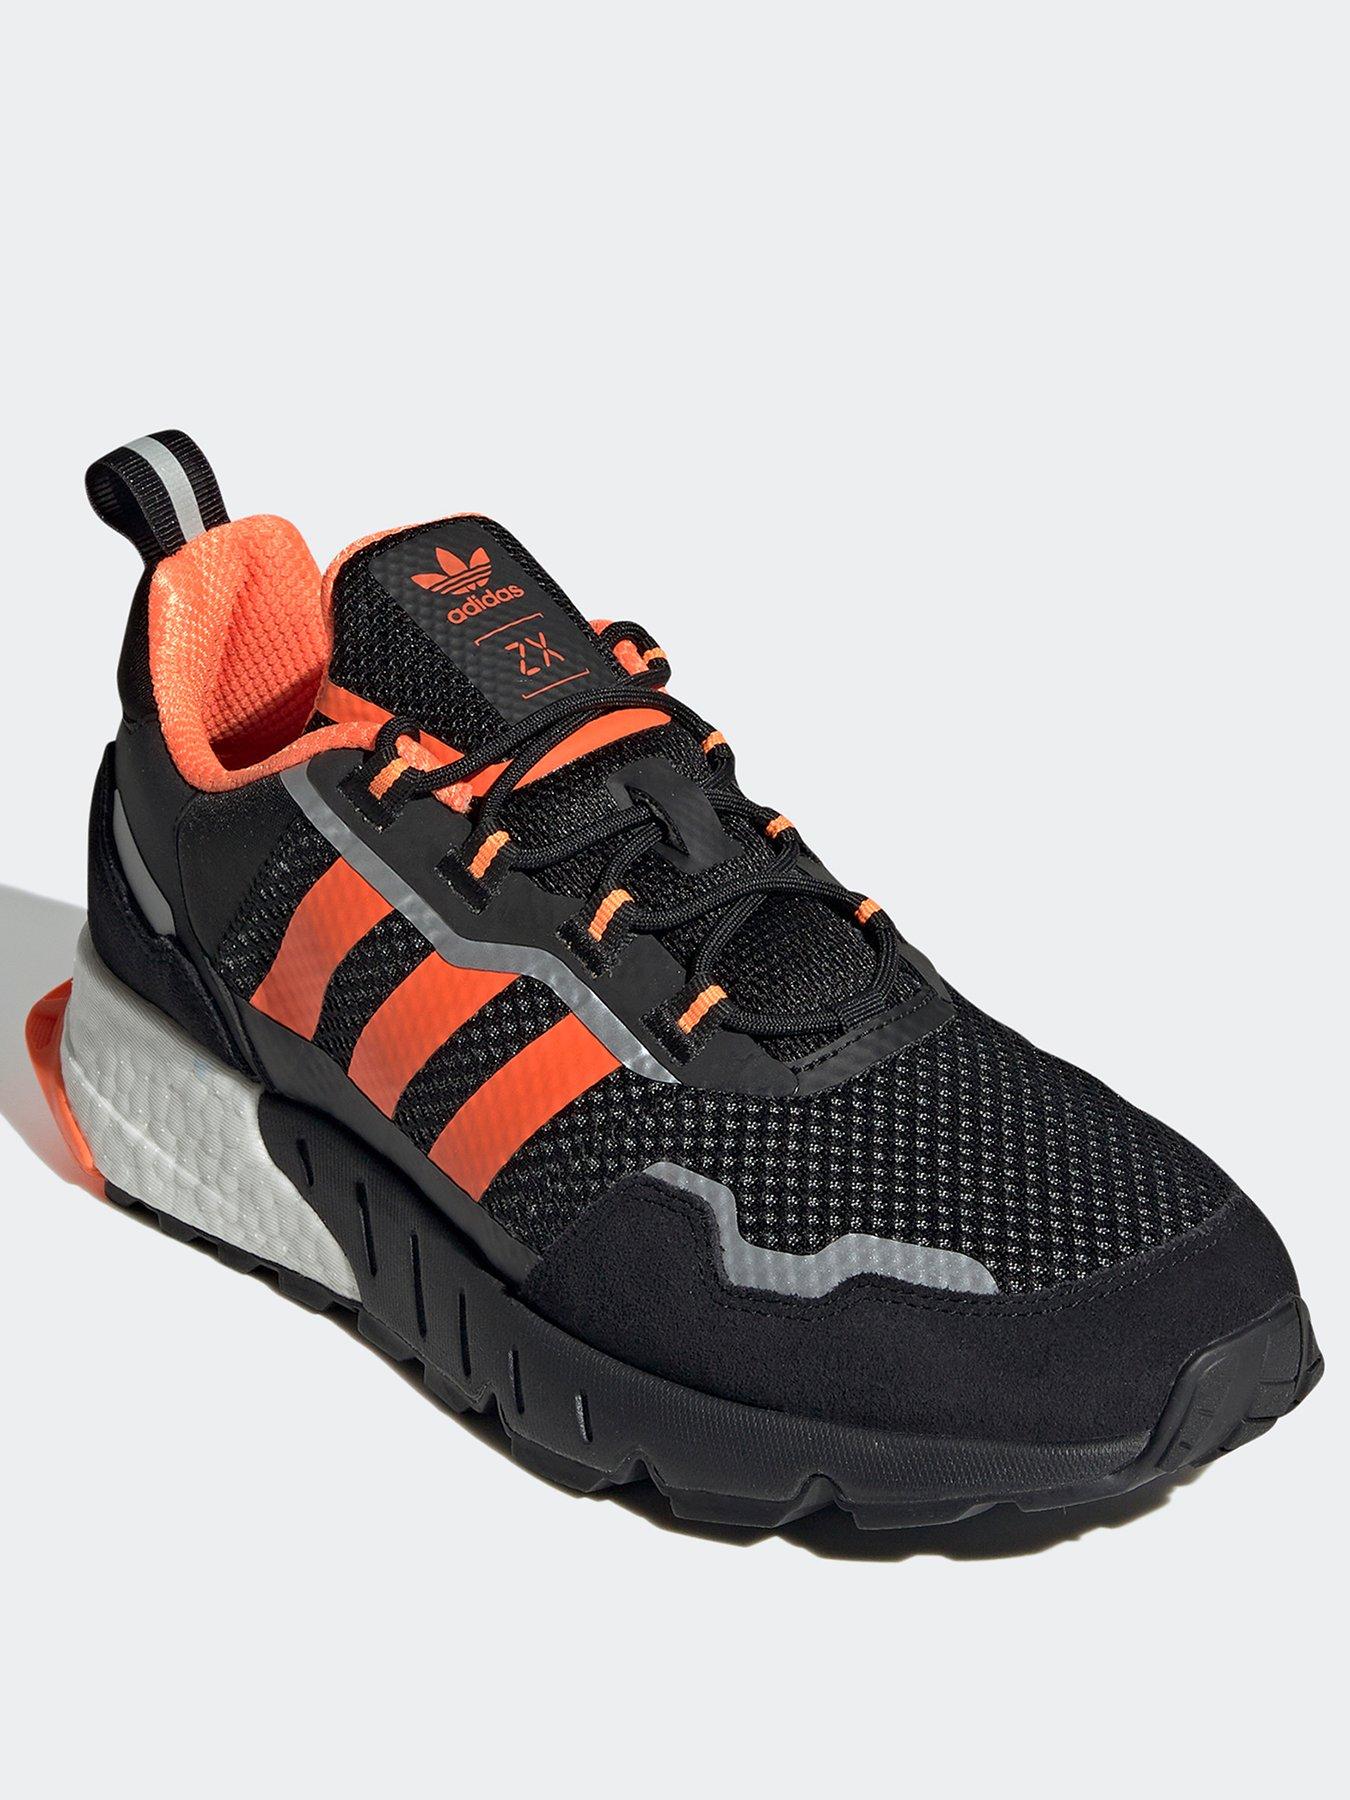  Zx 1k Boost Shoes